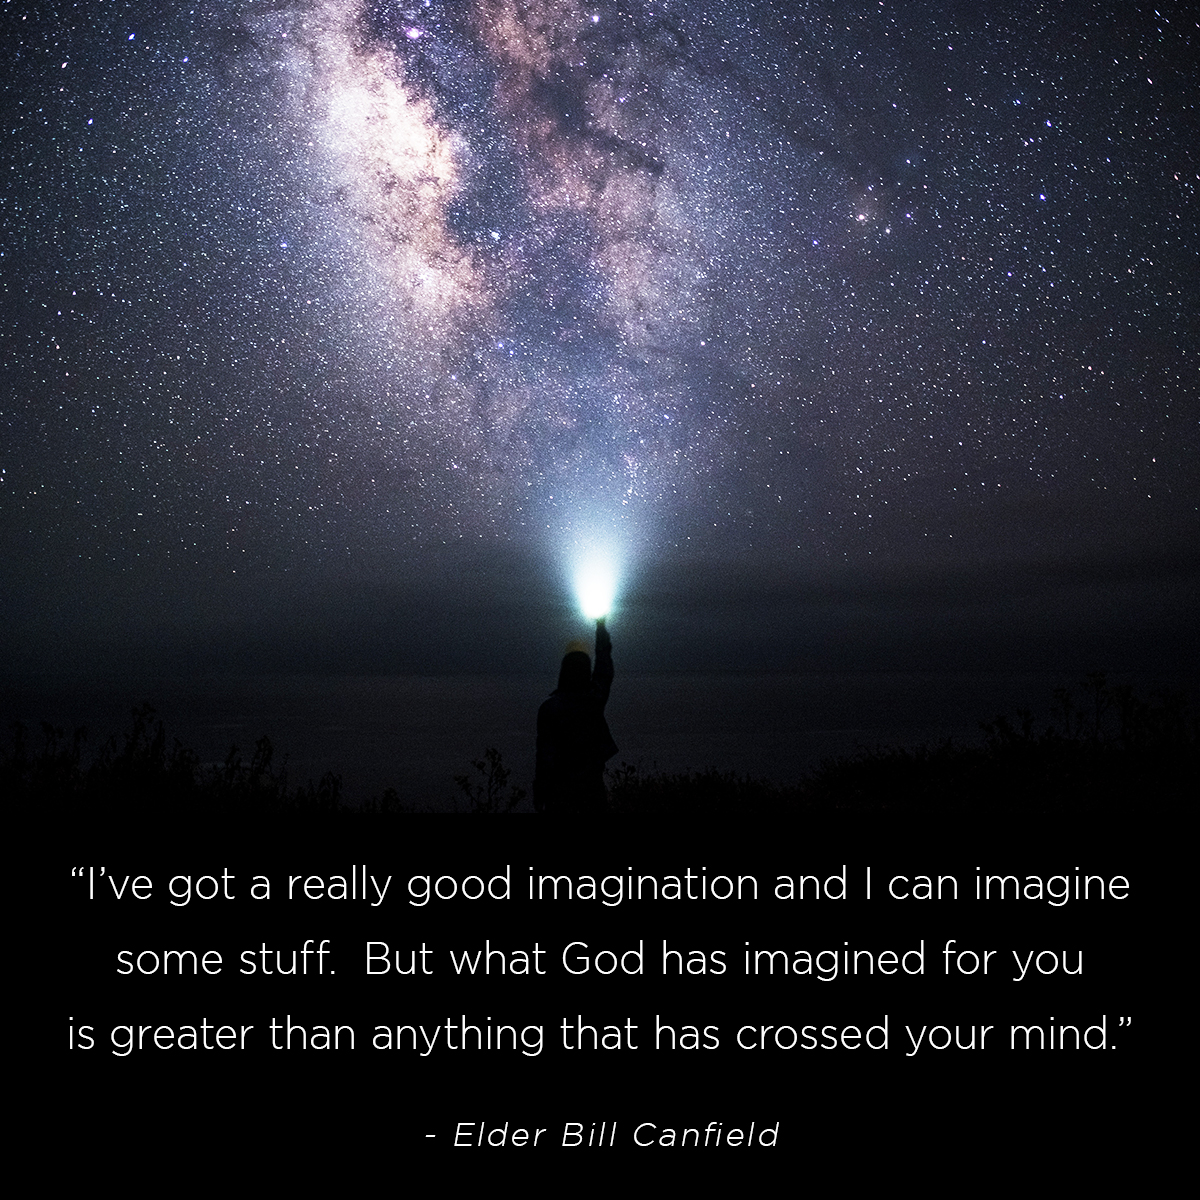 “I’ve got a really good imagination and I can imagine some stuff.  But what God has imagined for you is greater than anything that has crossed your mind.” – Elder Bill Canfield